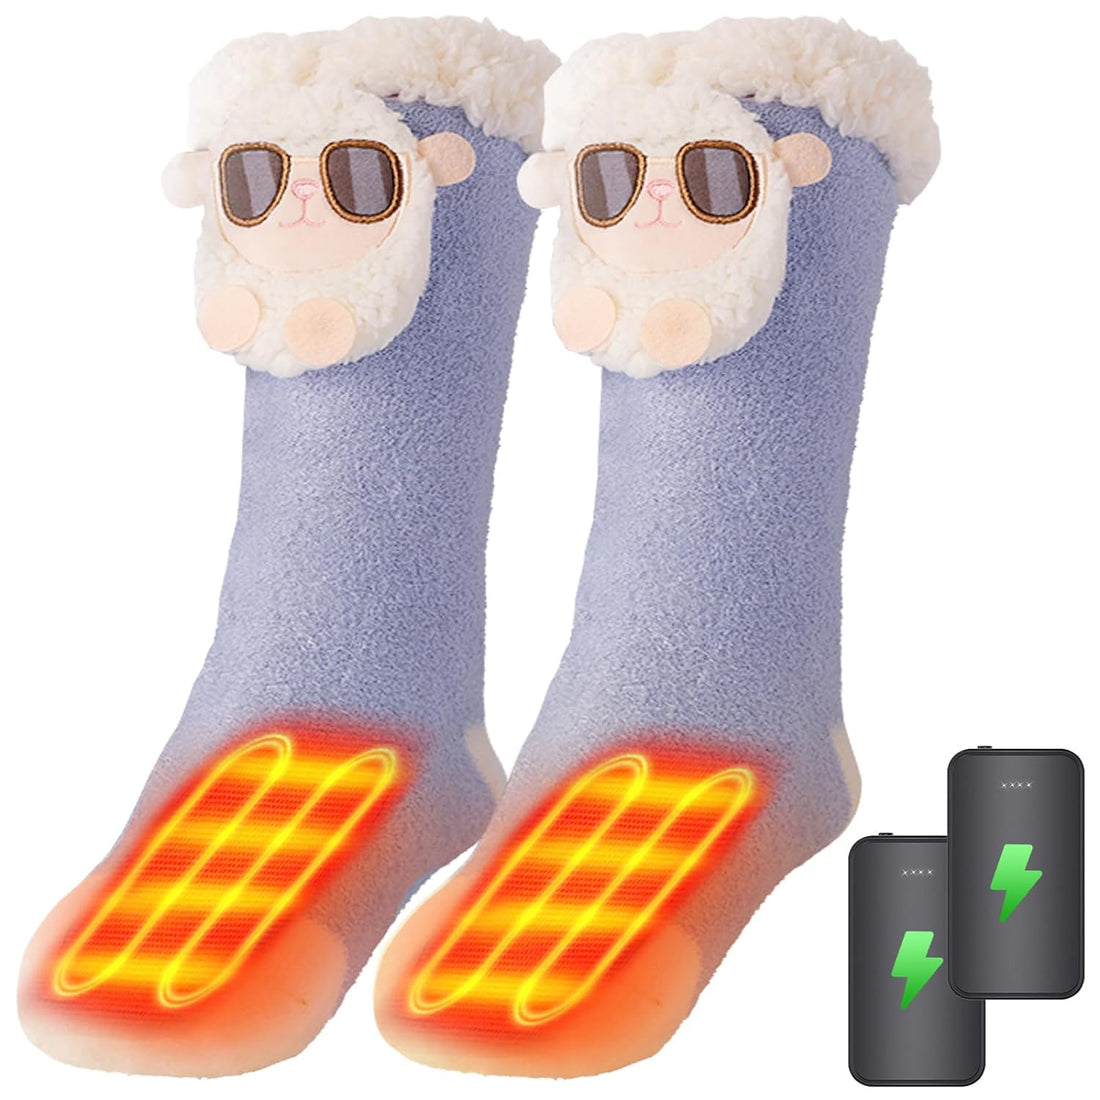 Women's Foot Warmer- Heated Socks for Bed and Indoor, Thickening Heating Socks with 2pcs 4000mah Battery, 3 Heating Levels